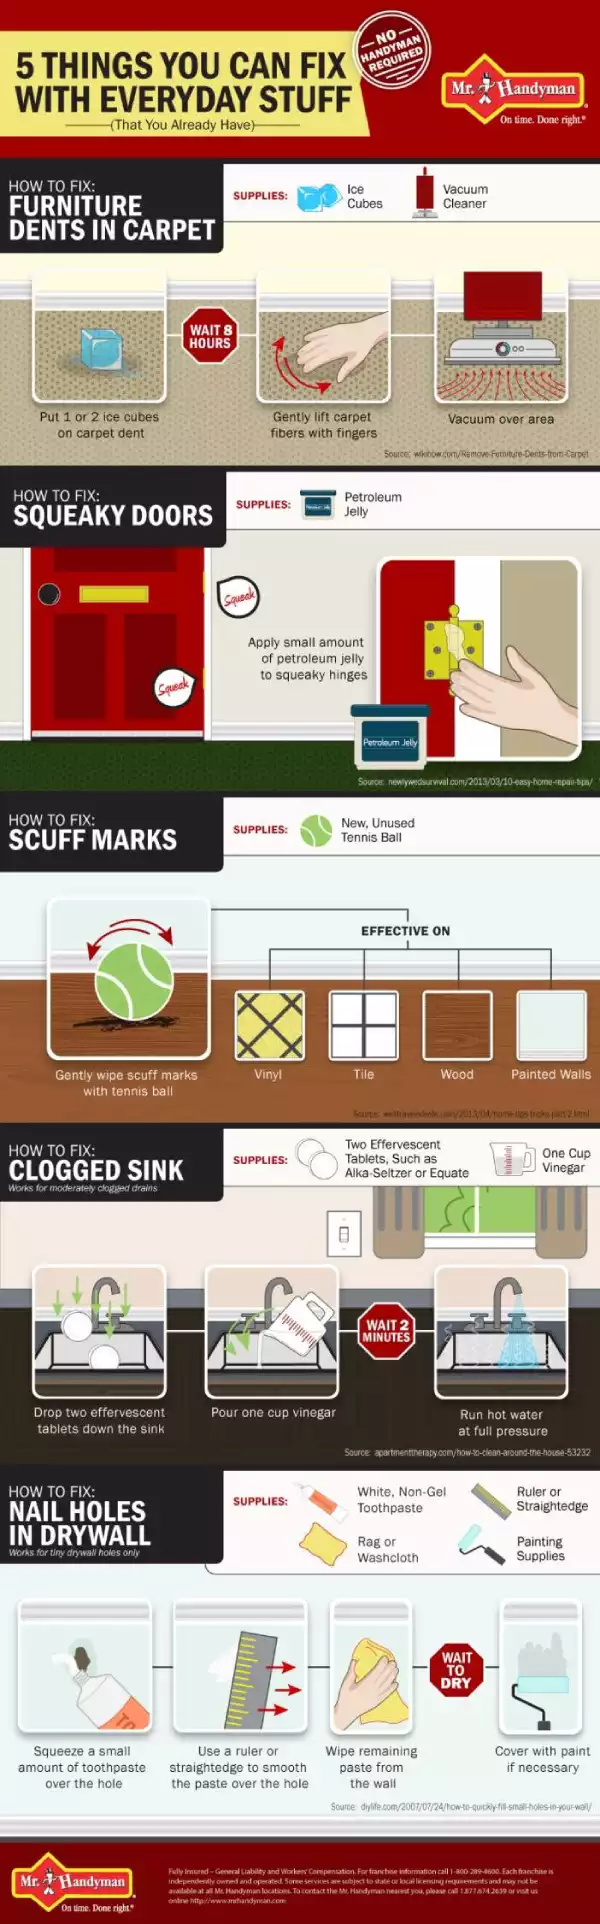 Mr. Handyman DIY Infographic - fix furniture, squeaky doors, scuff marks, clogged sink and nail holes.